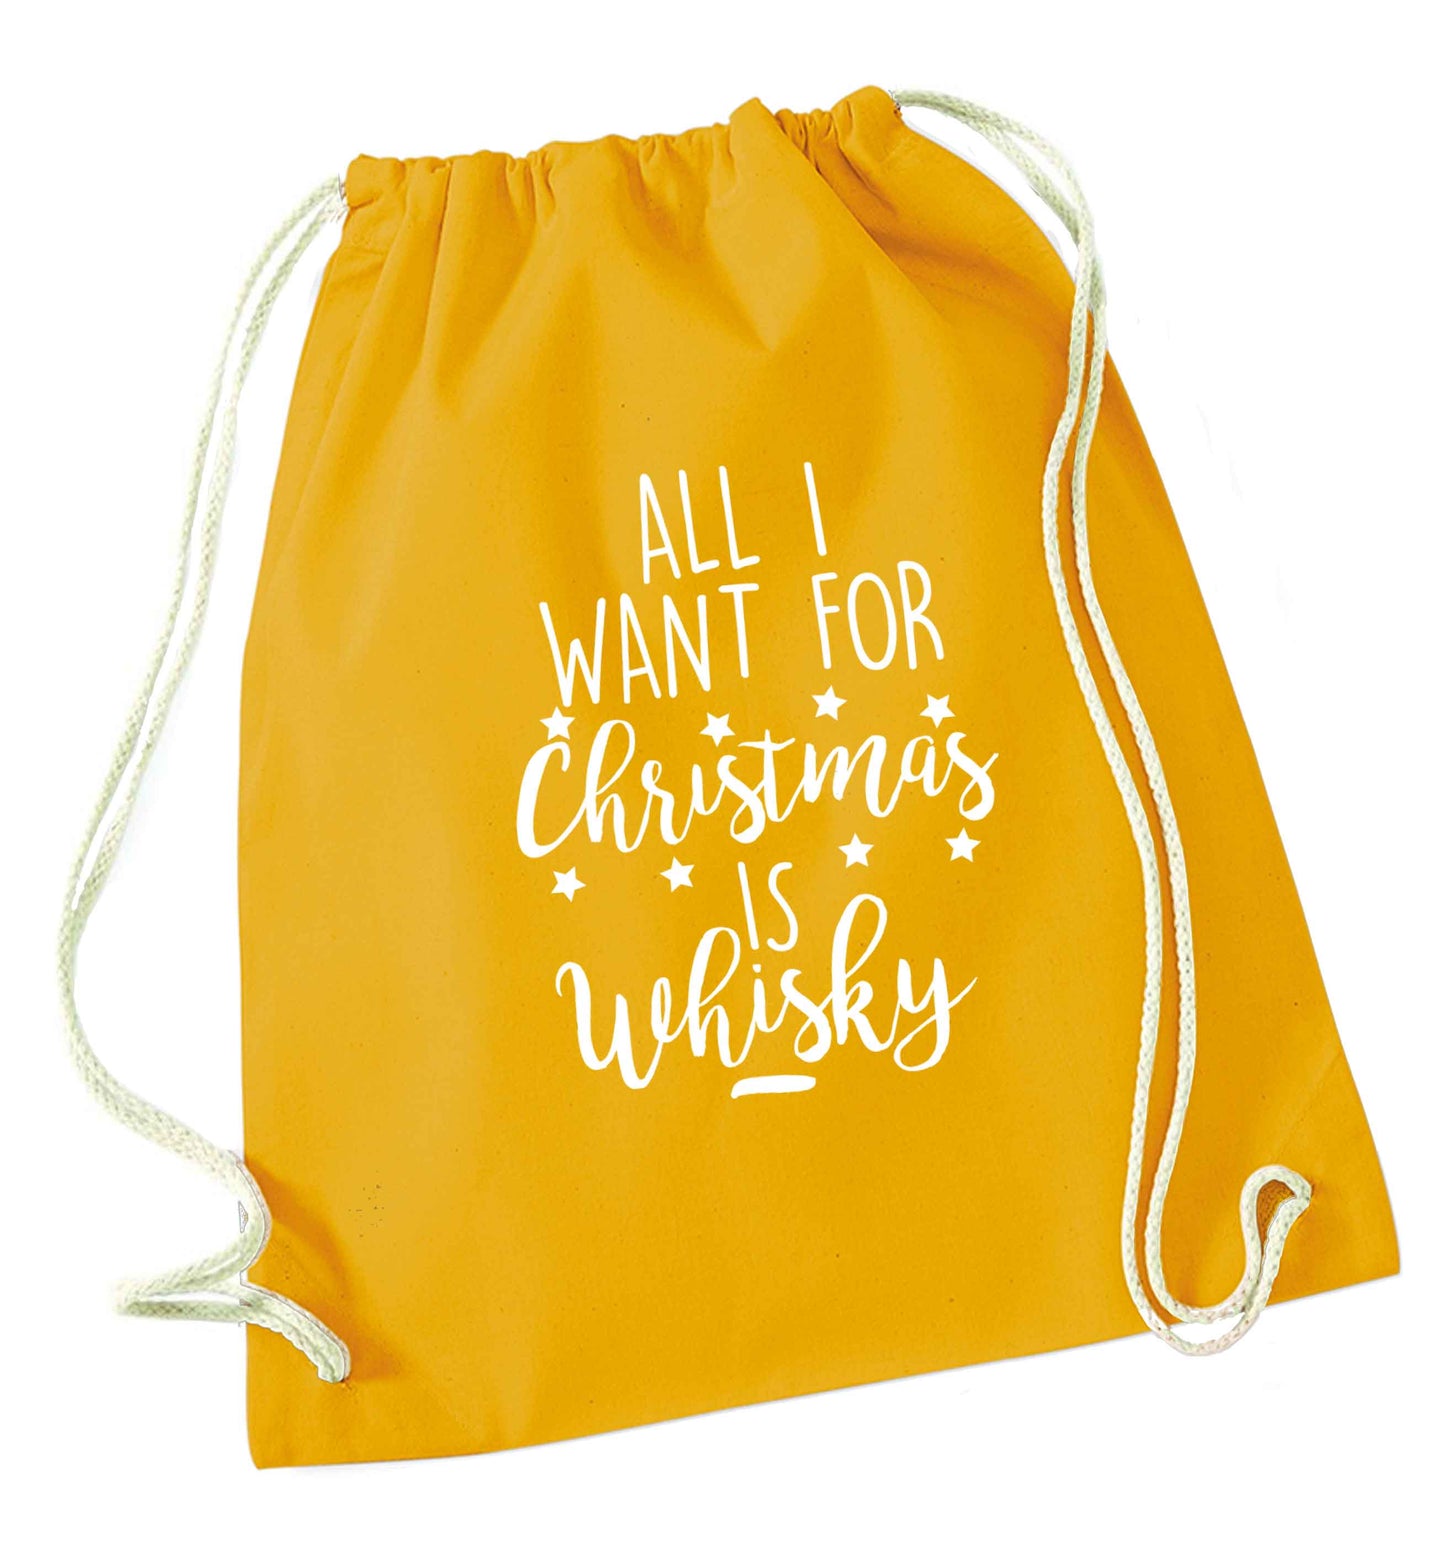 All I want for Christmas is whisky mustard drawstring bag